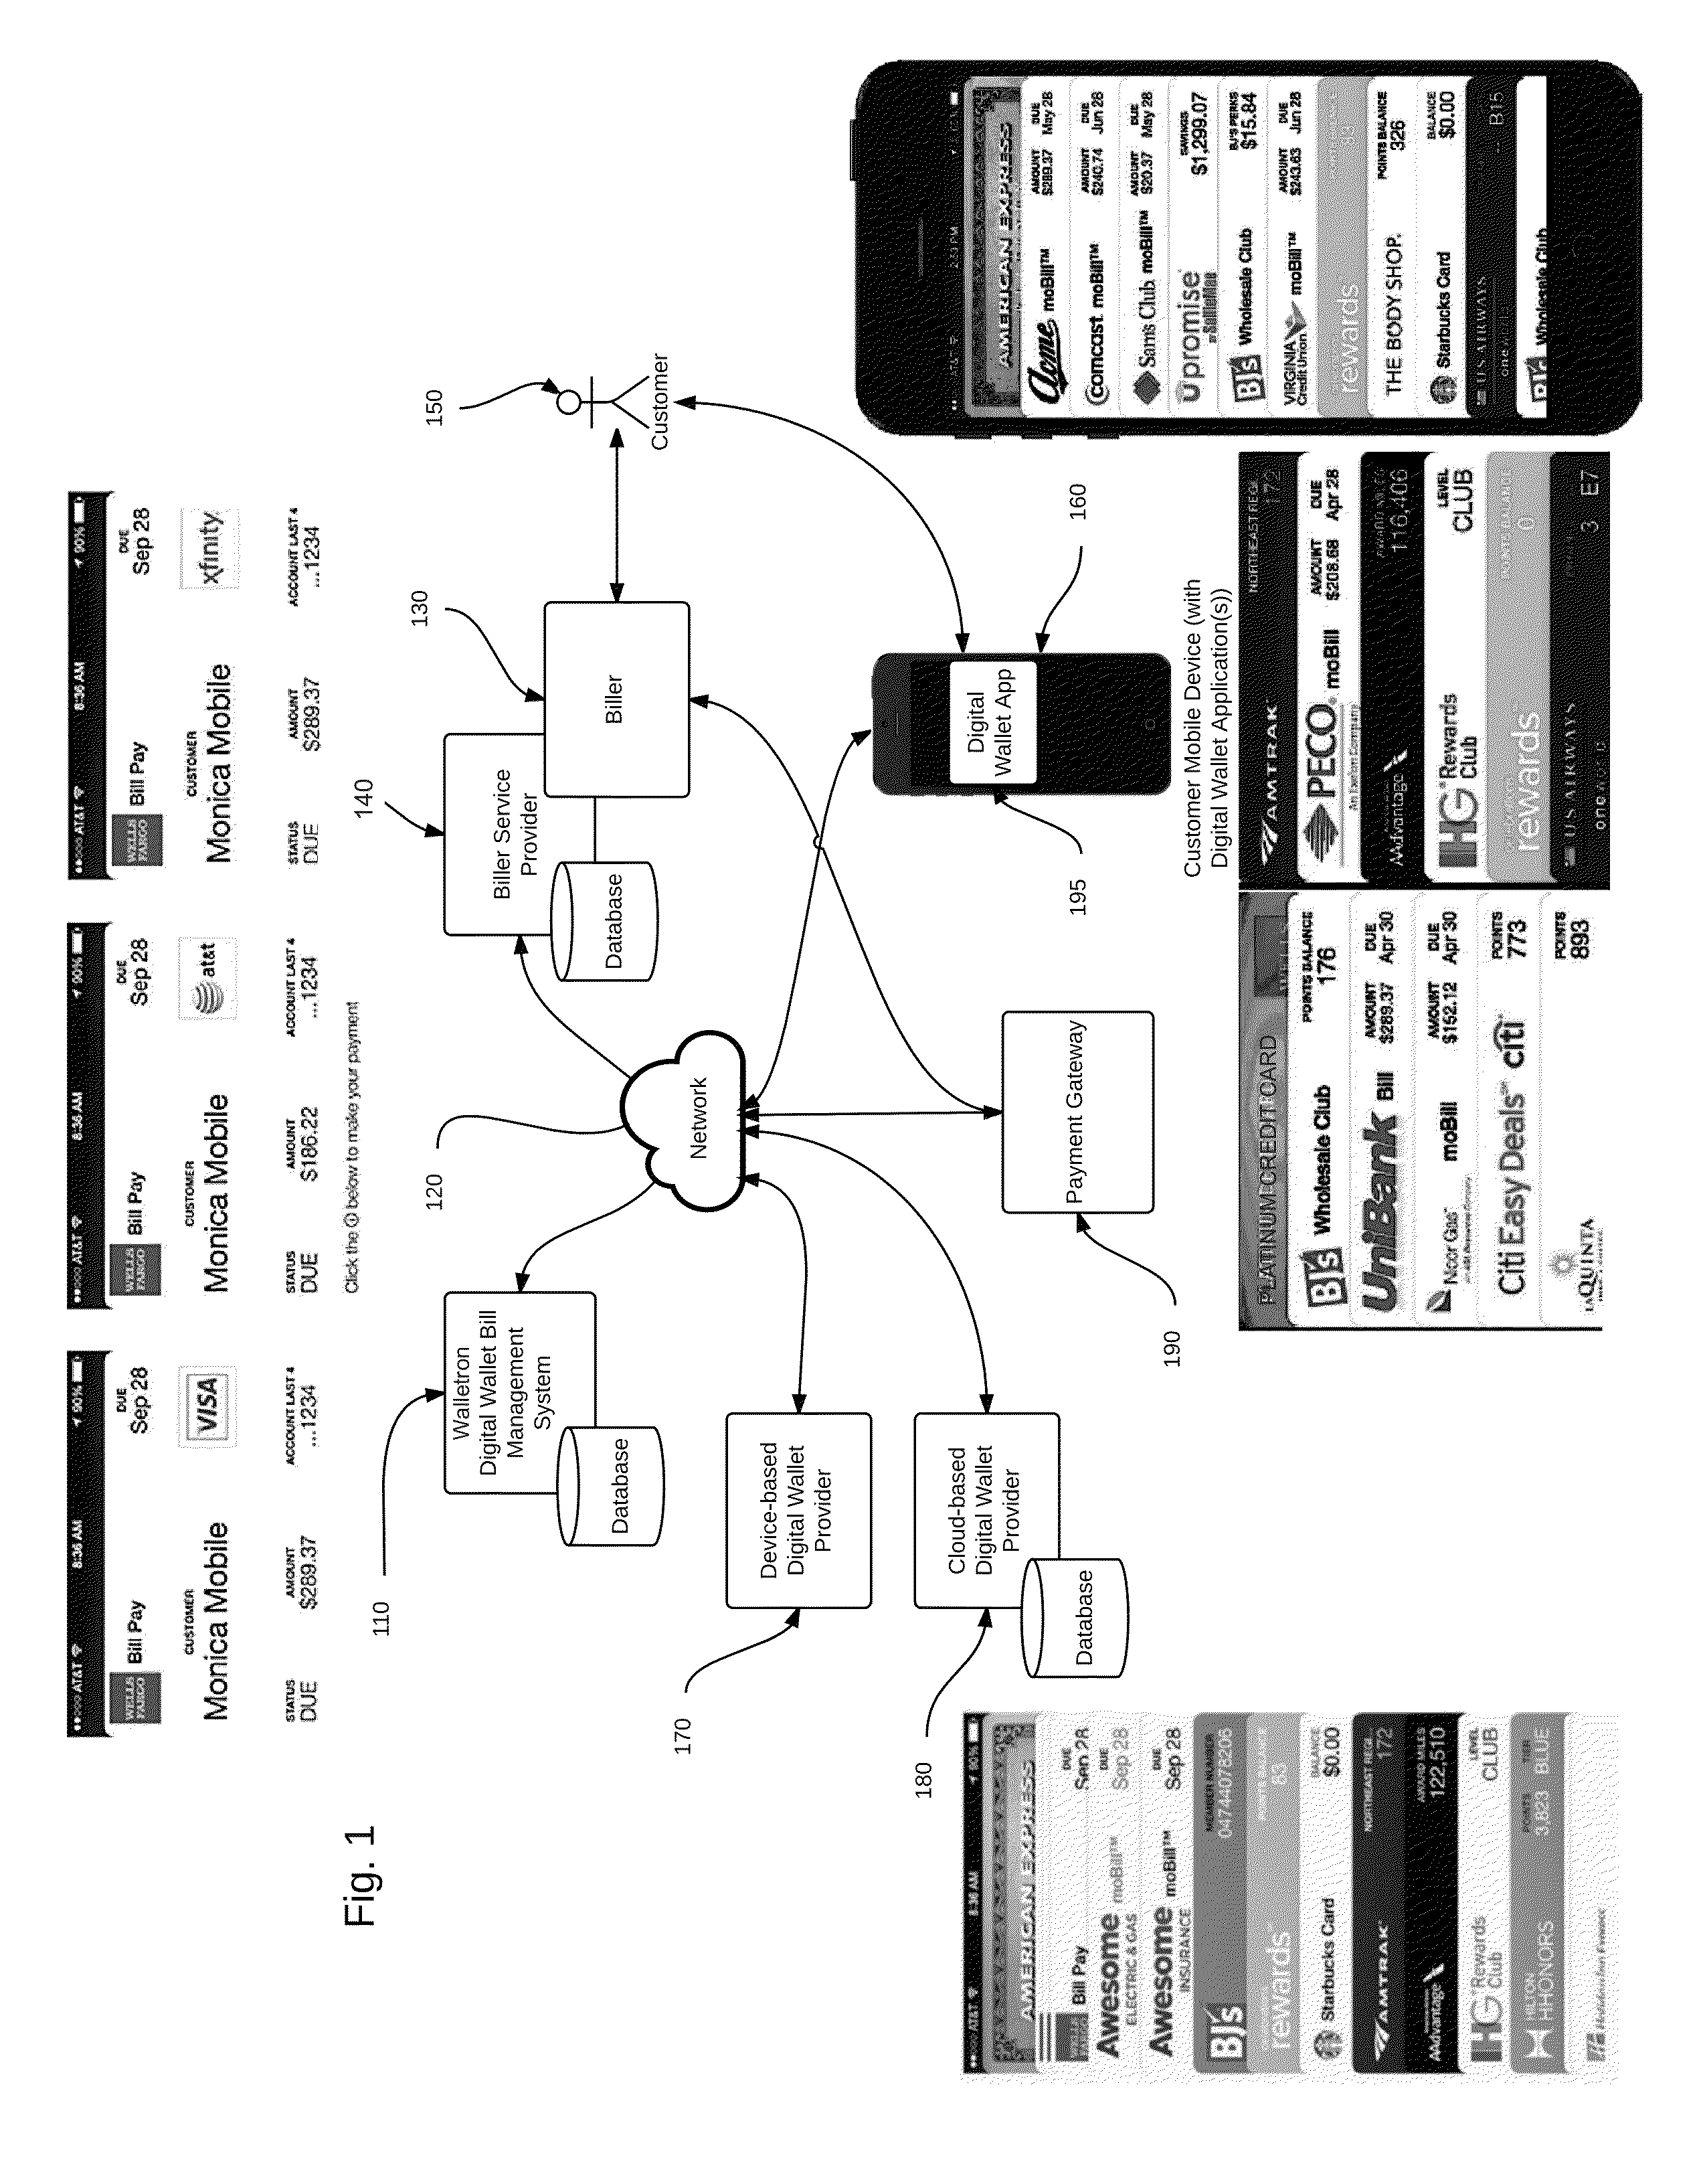 System and method for administering billing, servicing messaging and payment in digital wallets